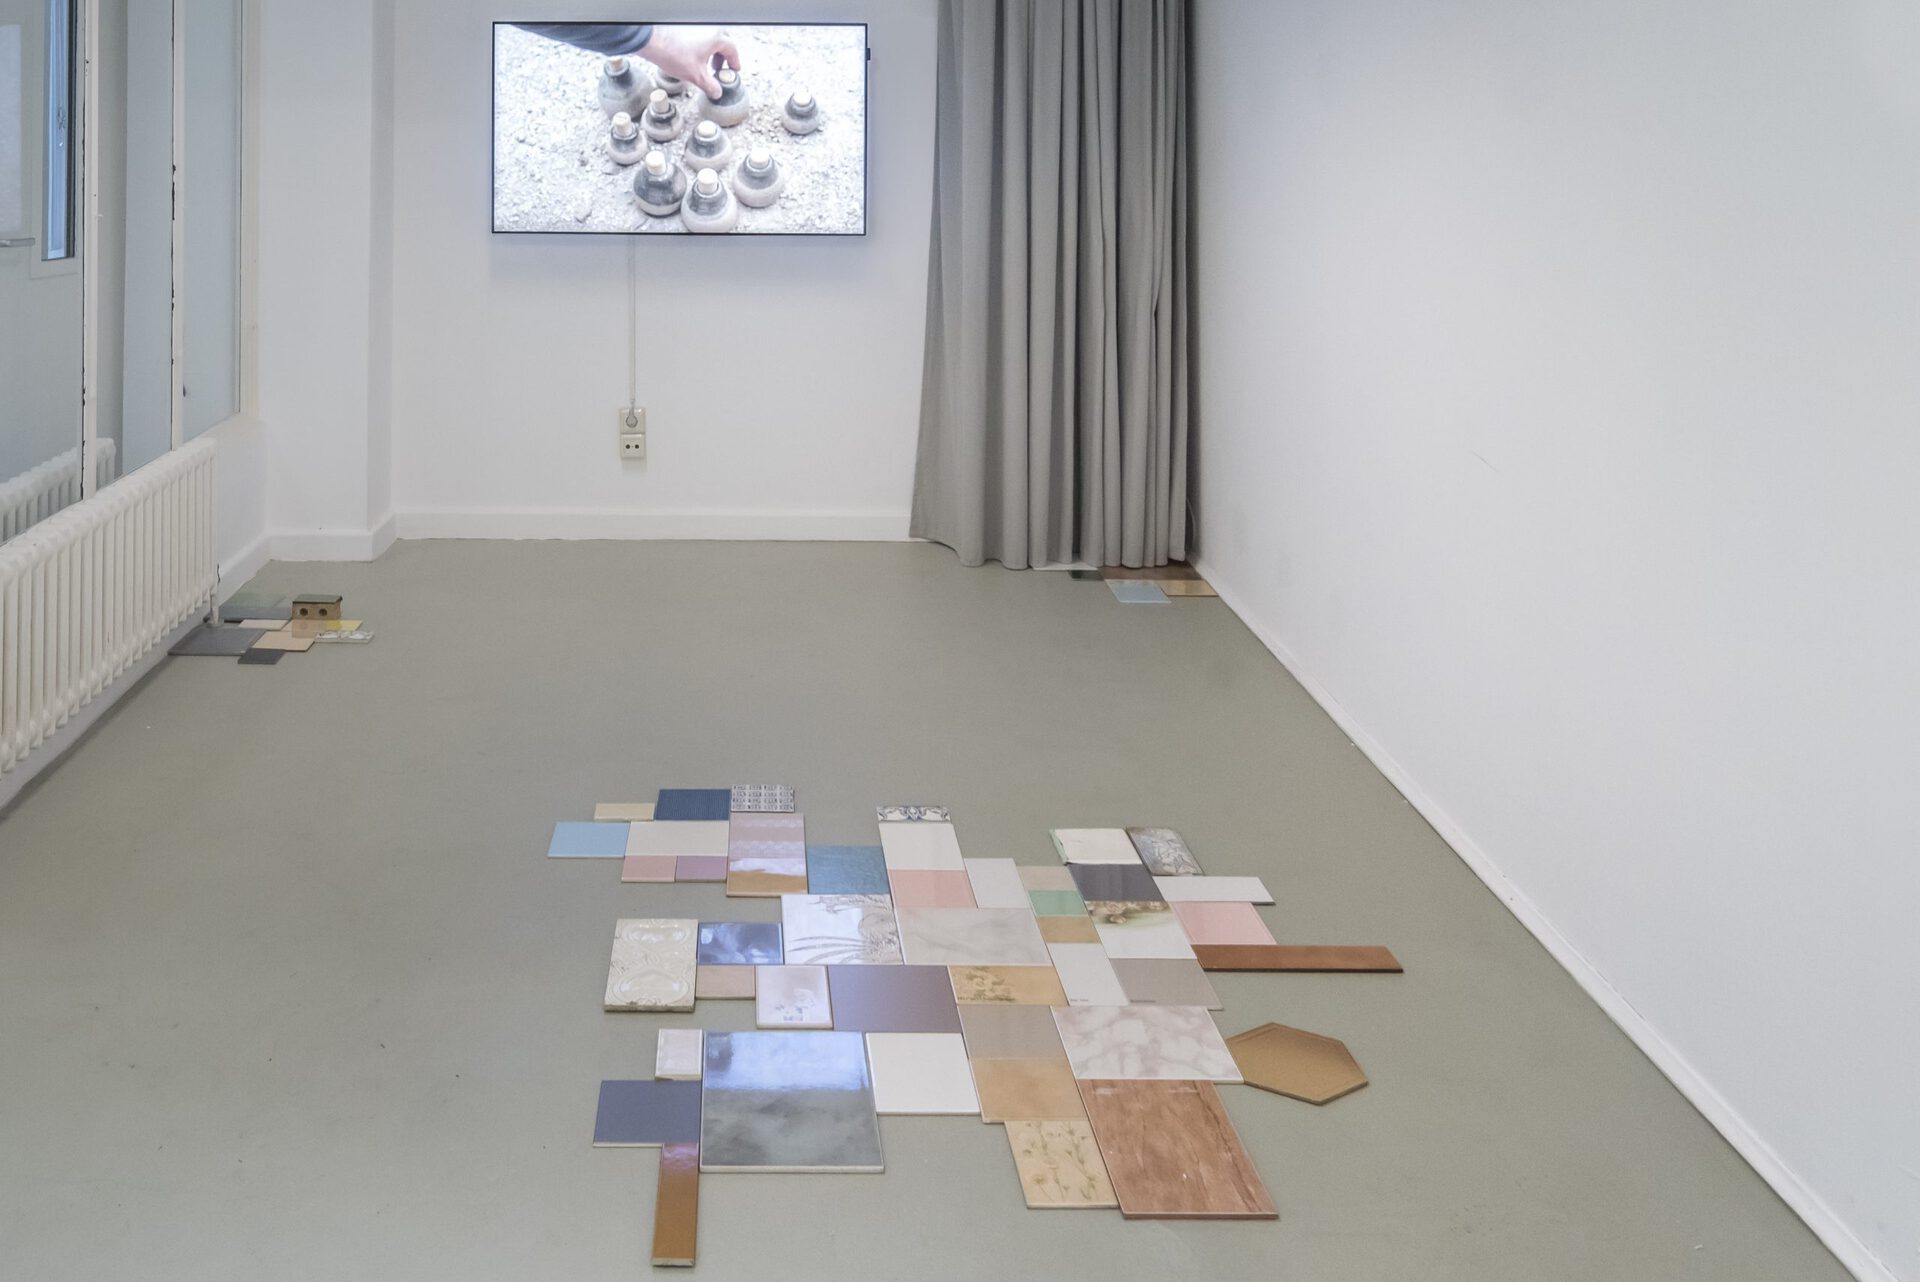 Yasemin Özcan, To Remember Everything is a Form of Madness 2/40, 2016, ceramic tiles, various dimensions; Earth, The Mother Of Us All, 2017, video